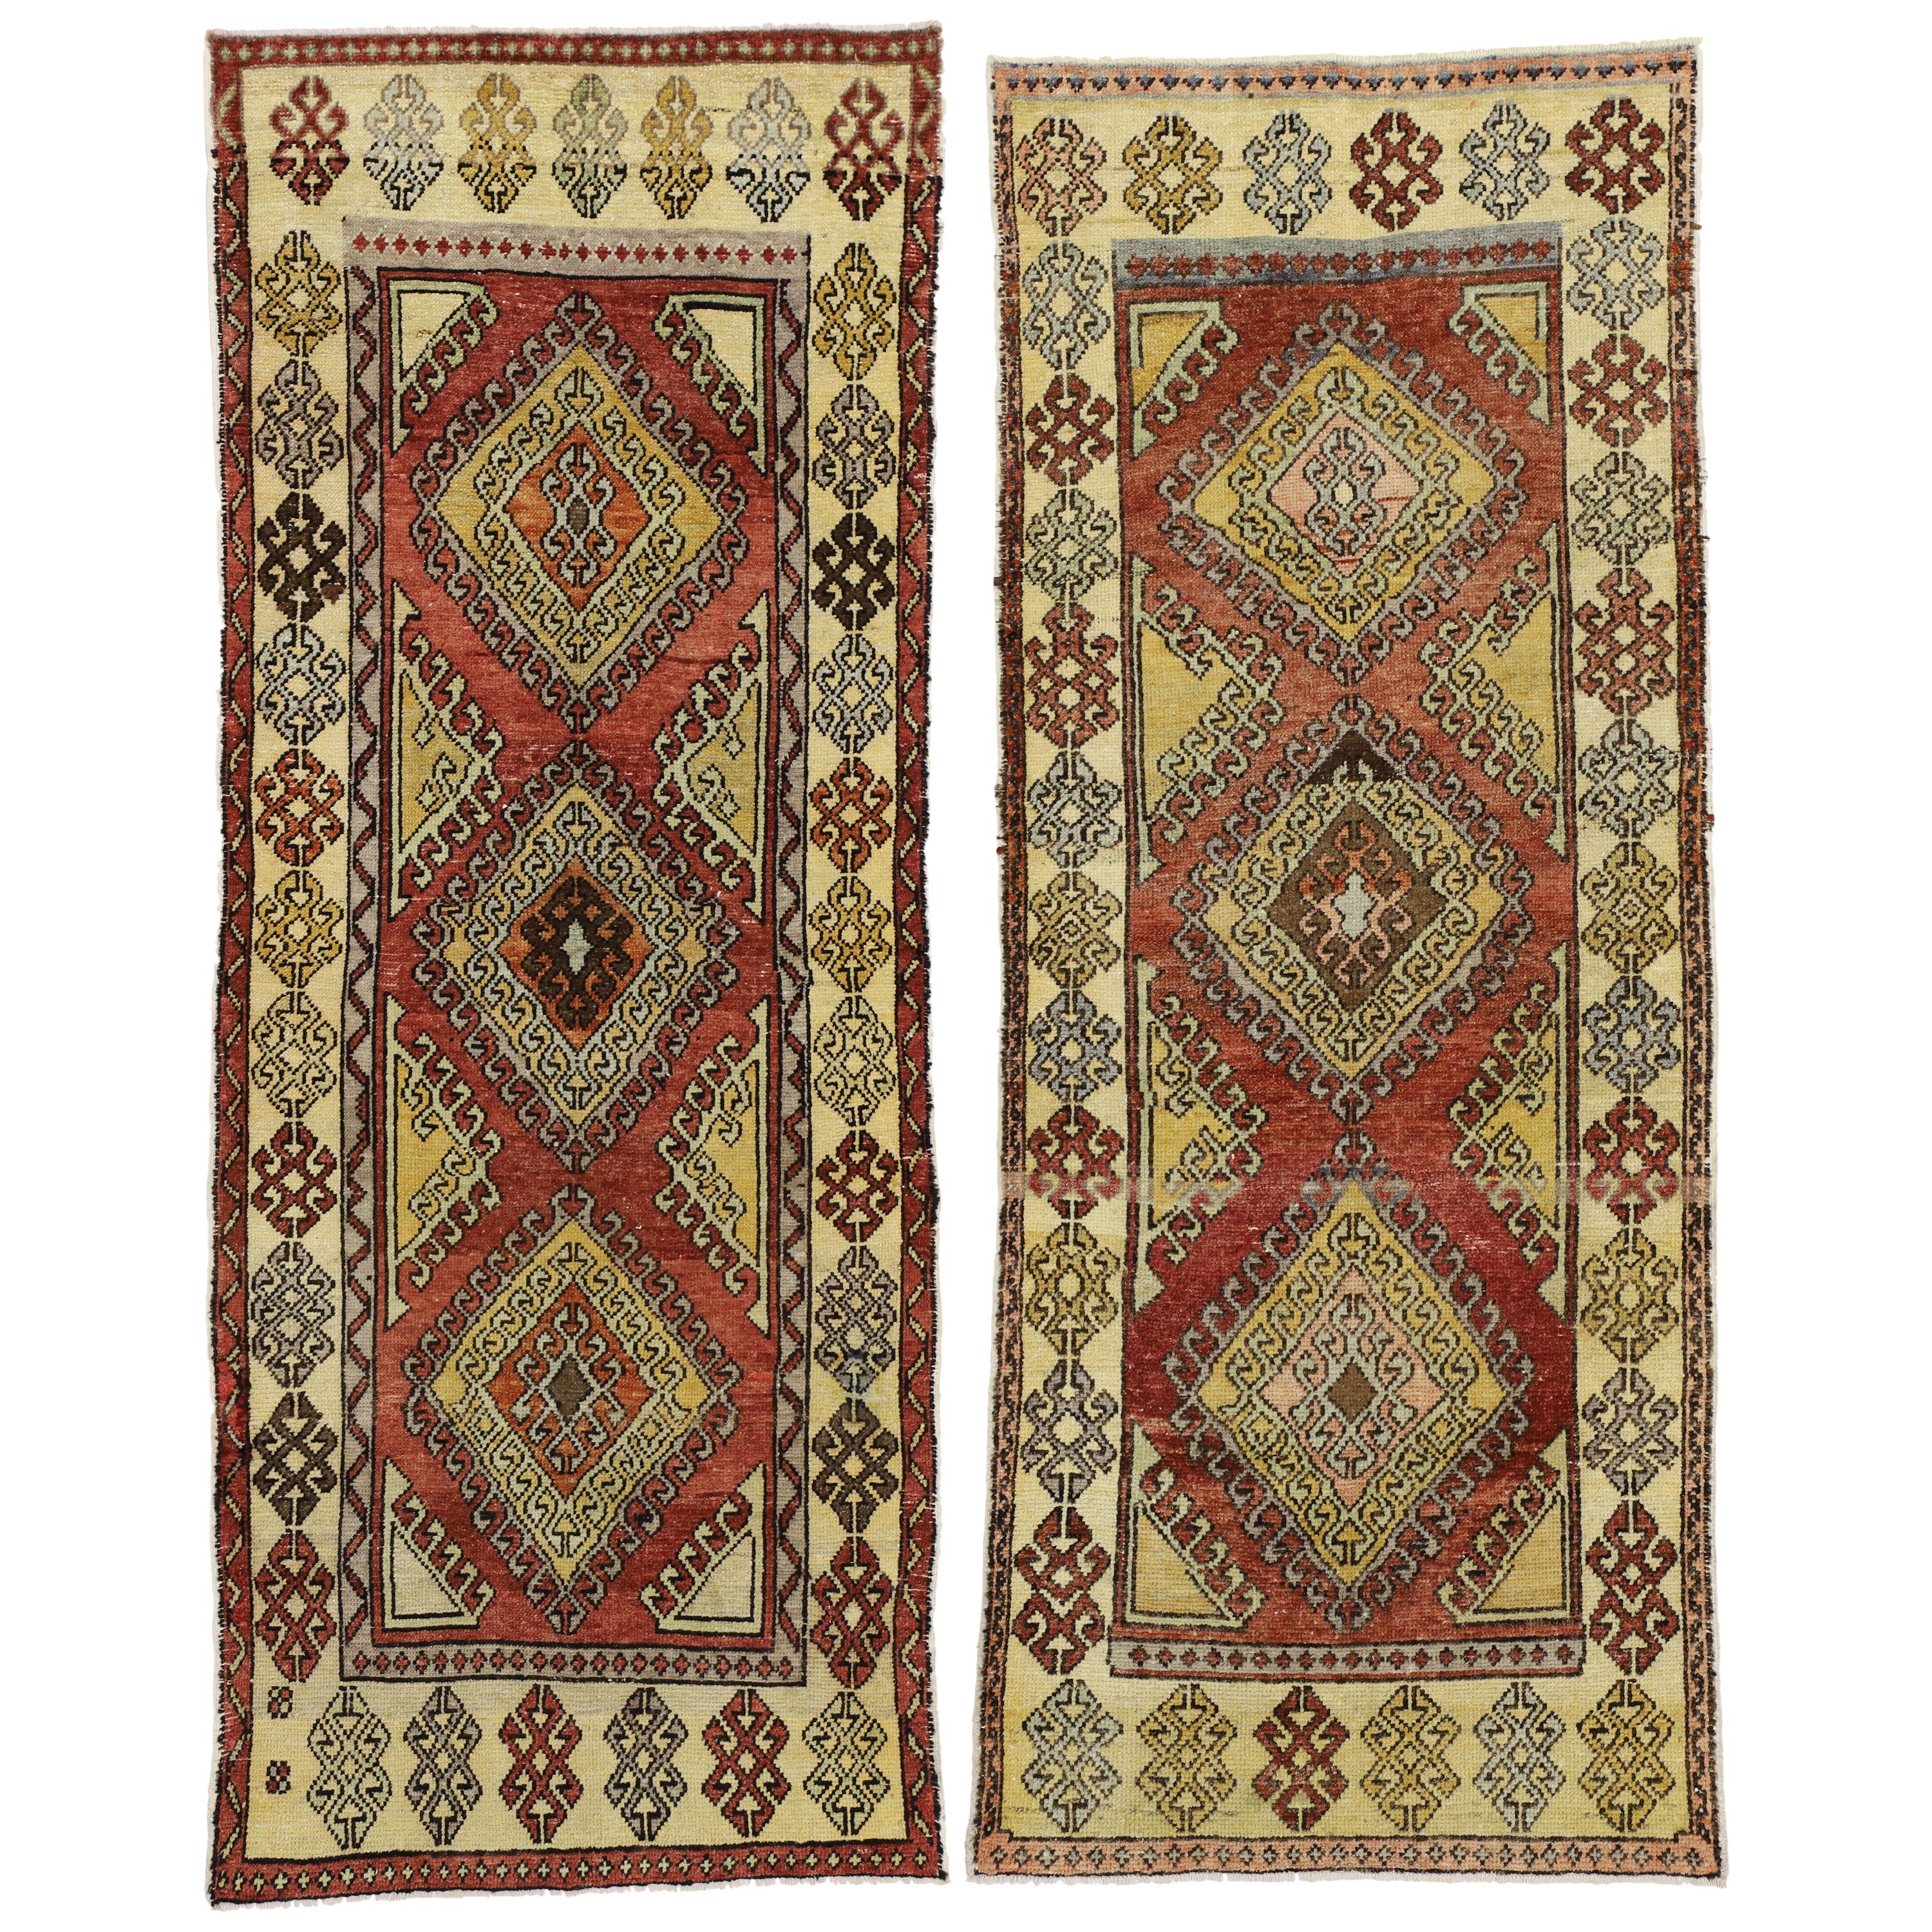 Pair of Vintage Turkish Oushak Runners, Matching Tribal Style Hallway Runners